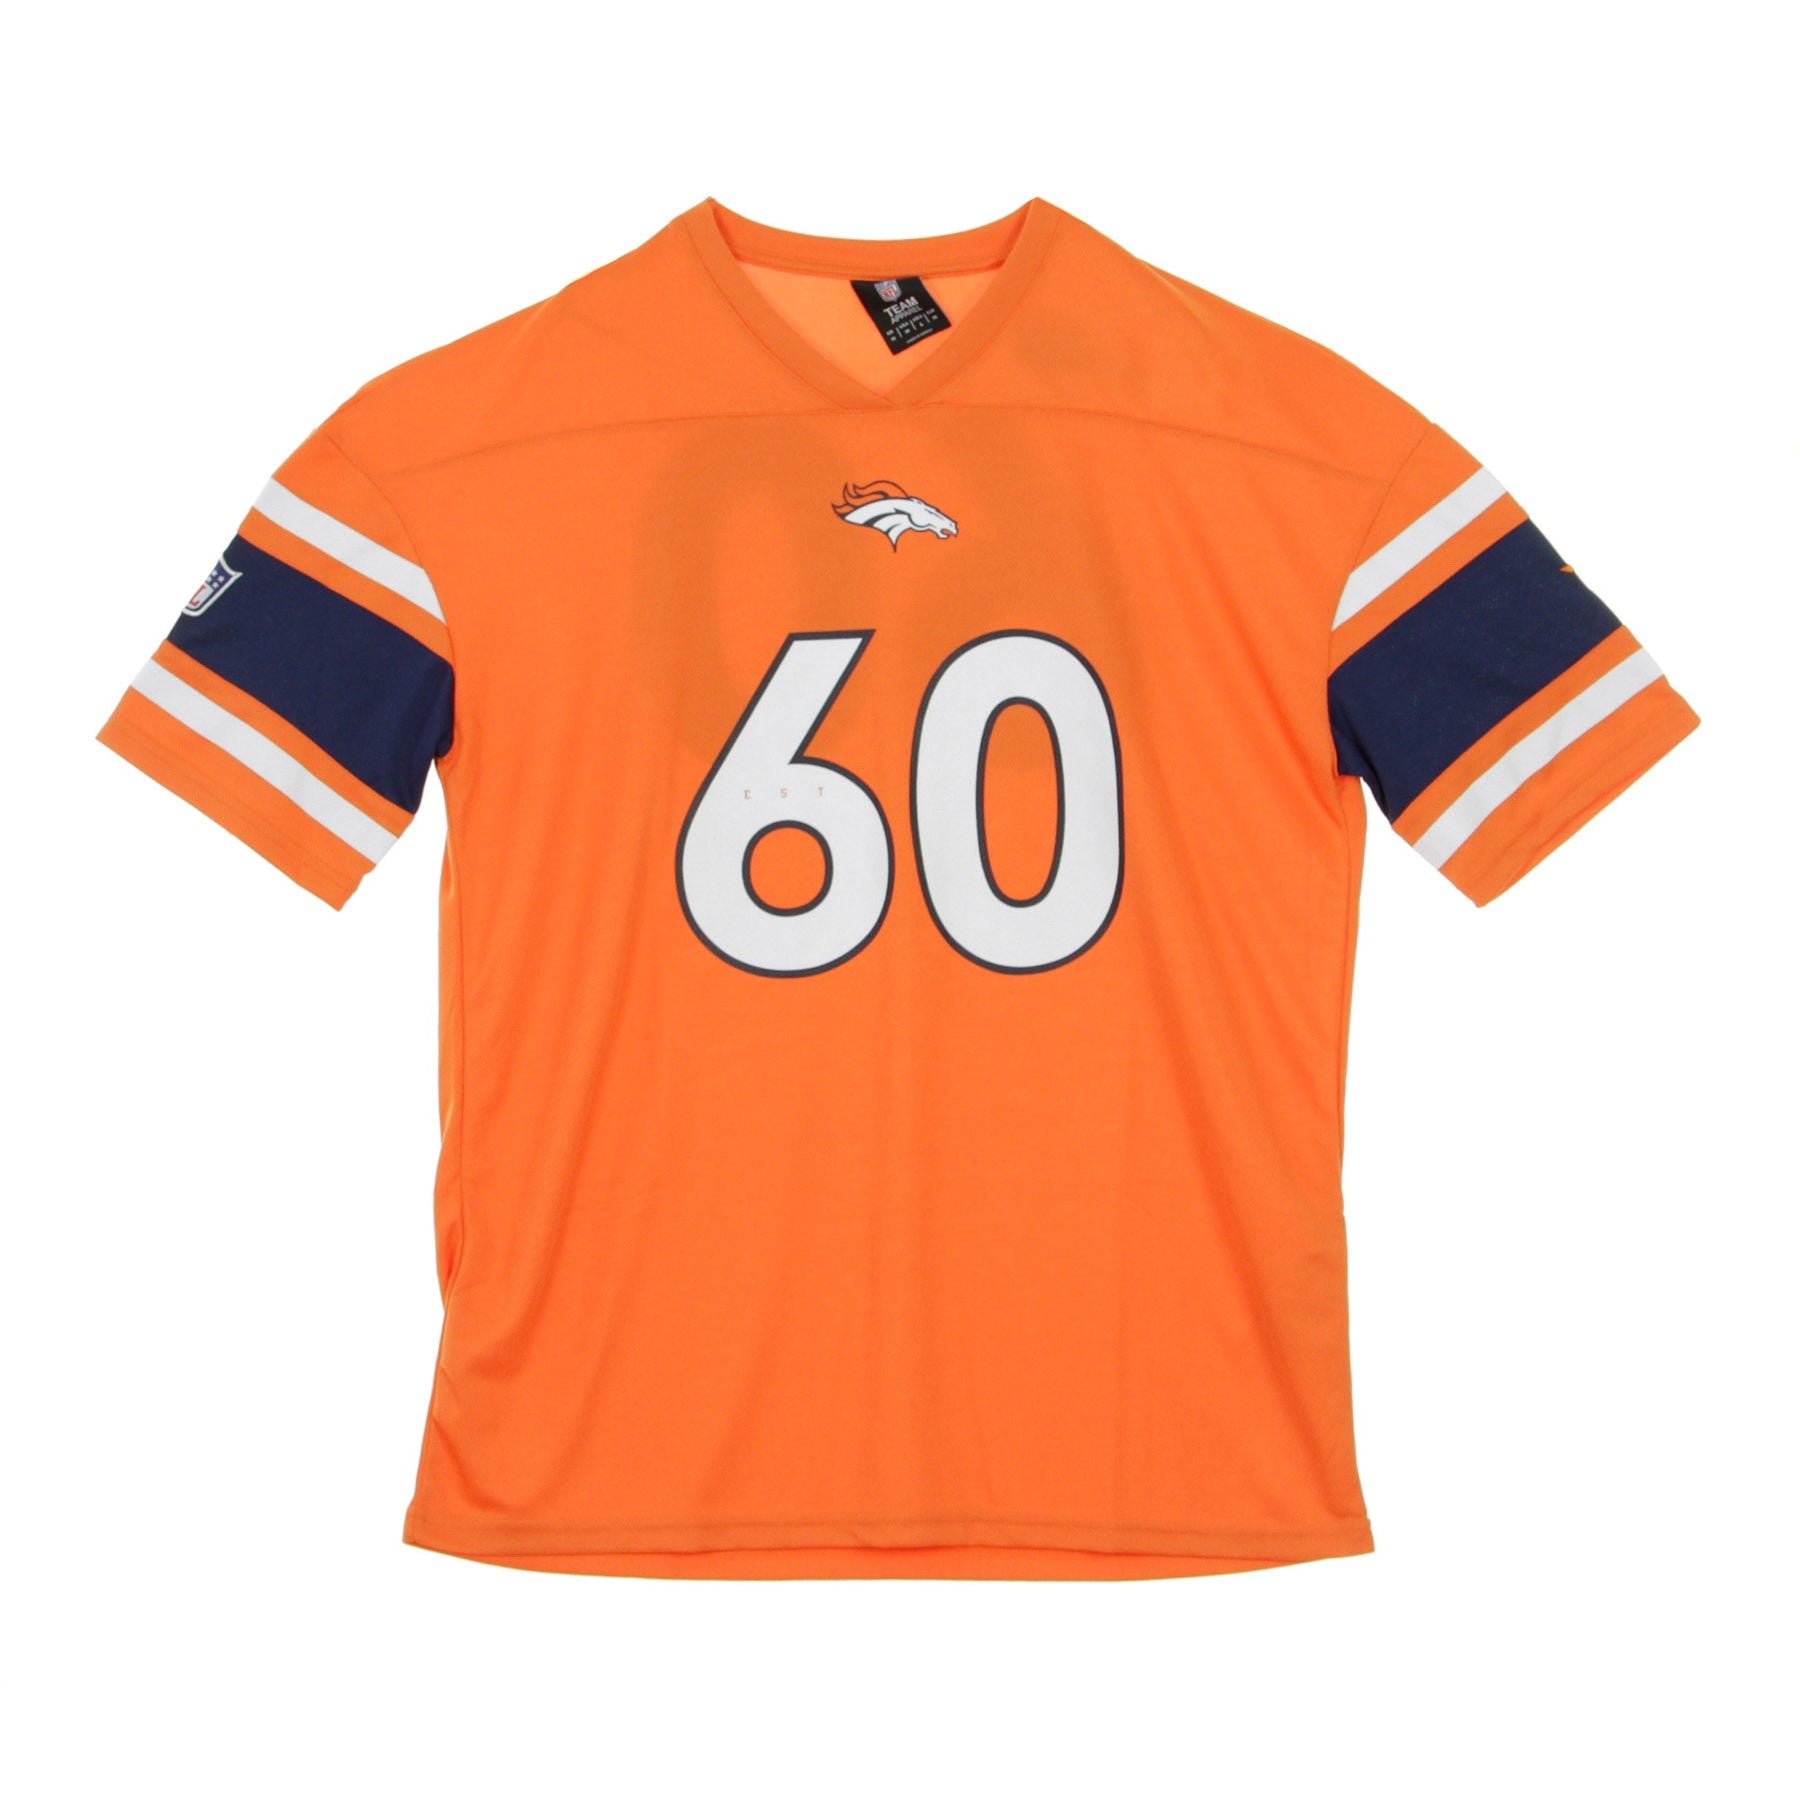 Men's Jersey Nfl Iconic Franchise Poly Mesh Supporters Jersey Denbro Original Team Colors